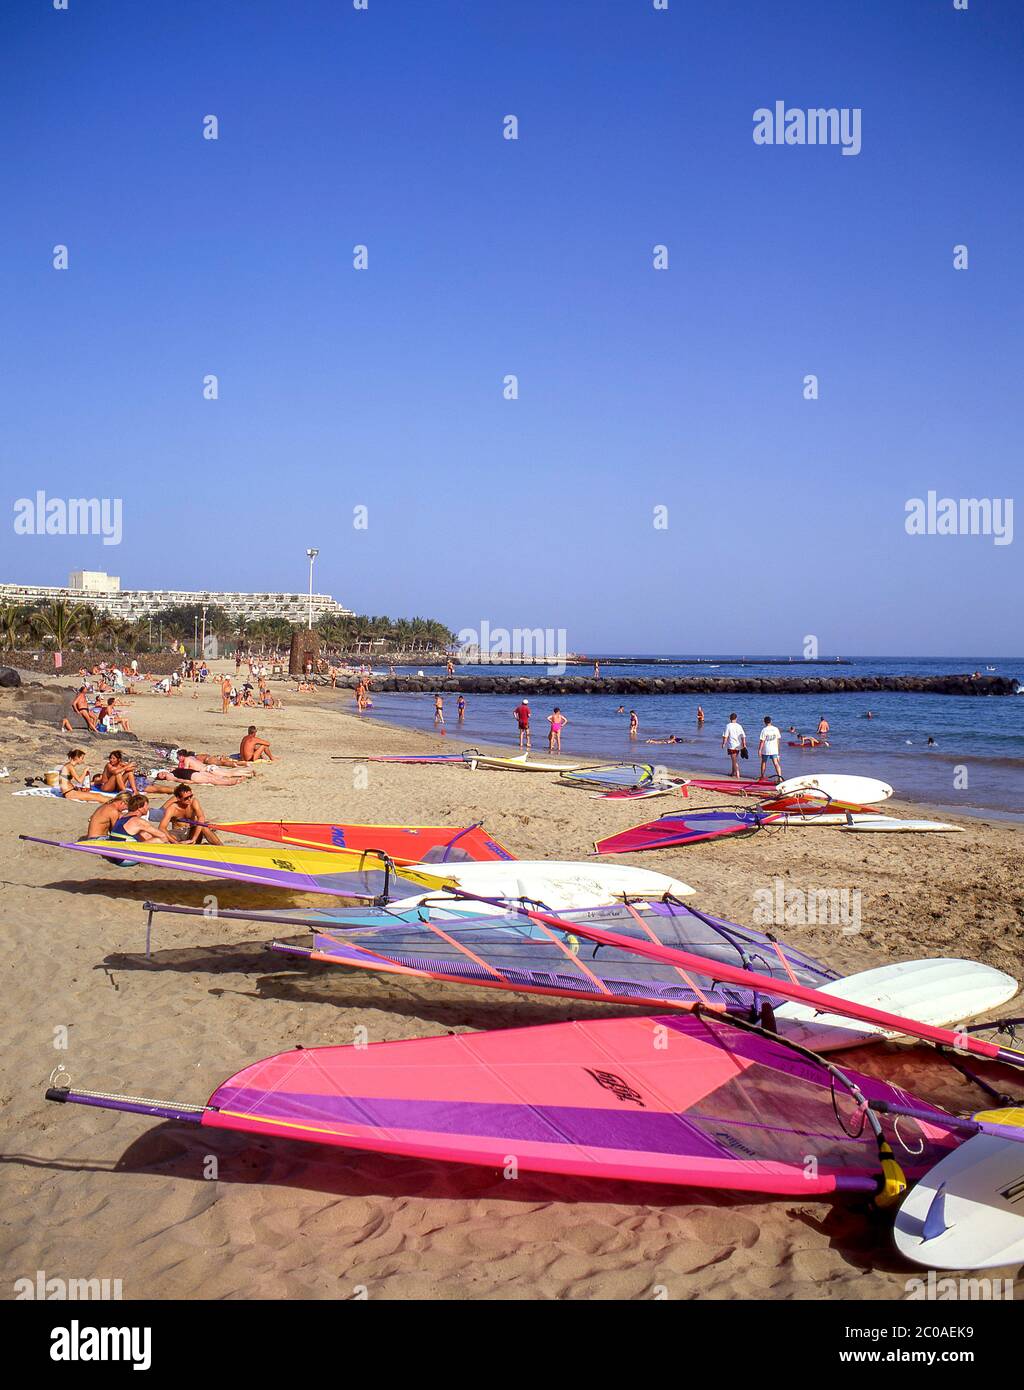 Windsurfing boards with sails on Las Cucharas Beach, Costa Teguise, Lanzarote, Canary Islands, Spain Stock Photo